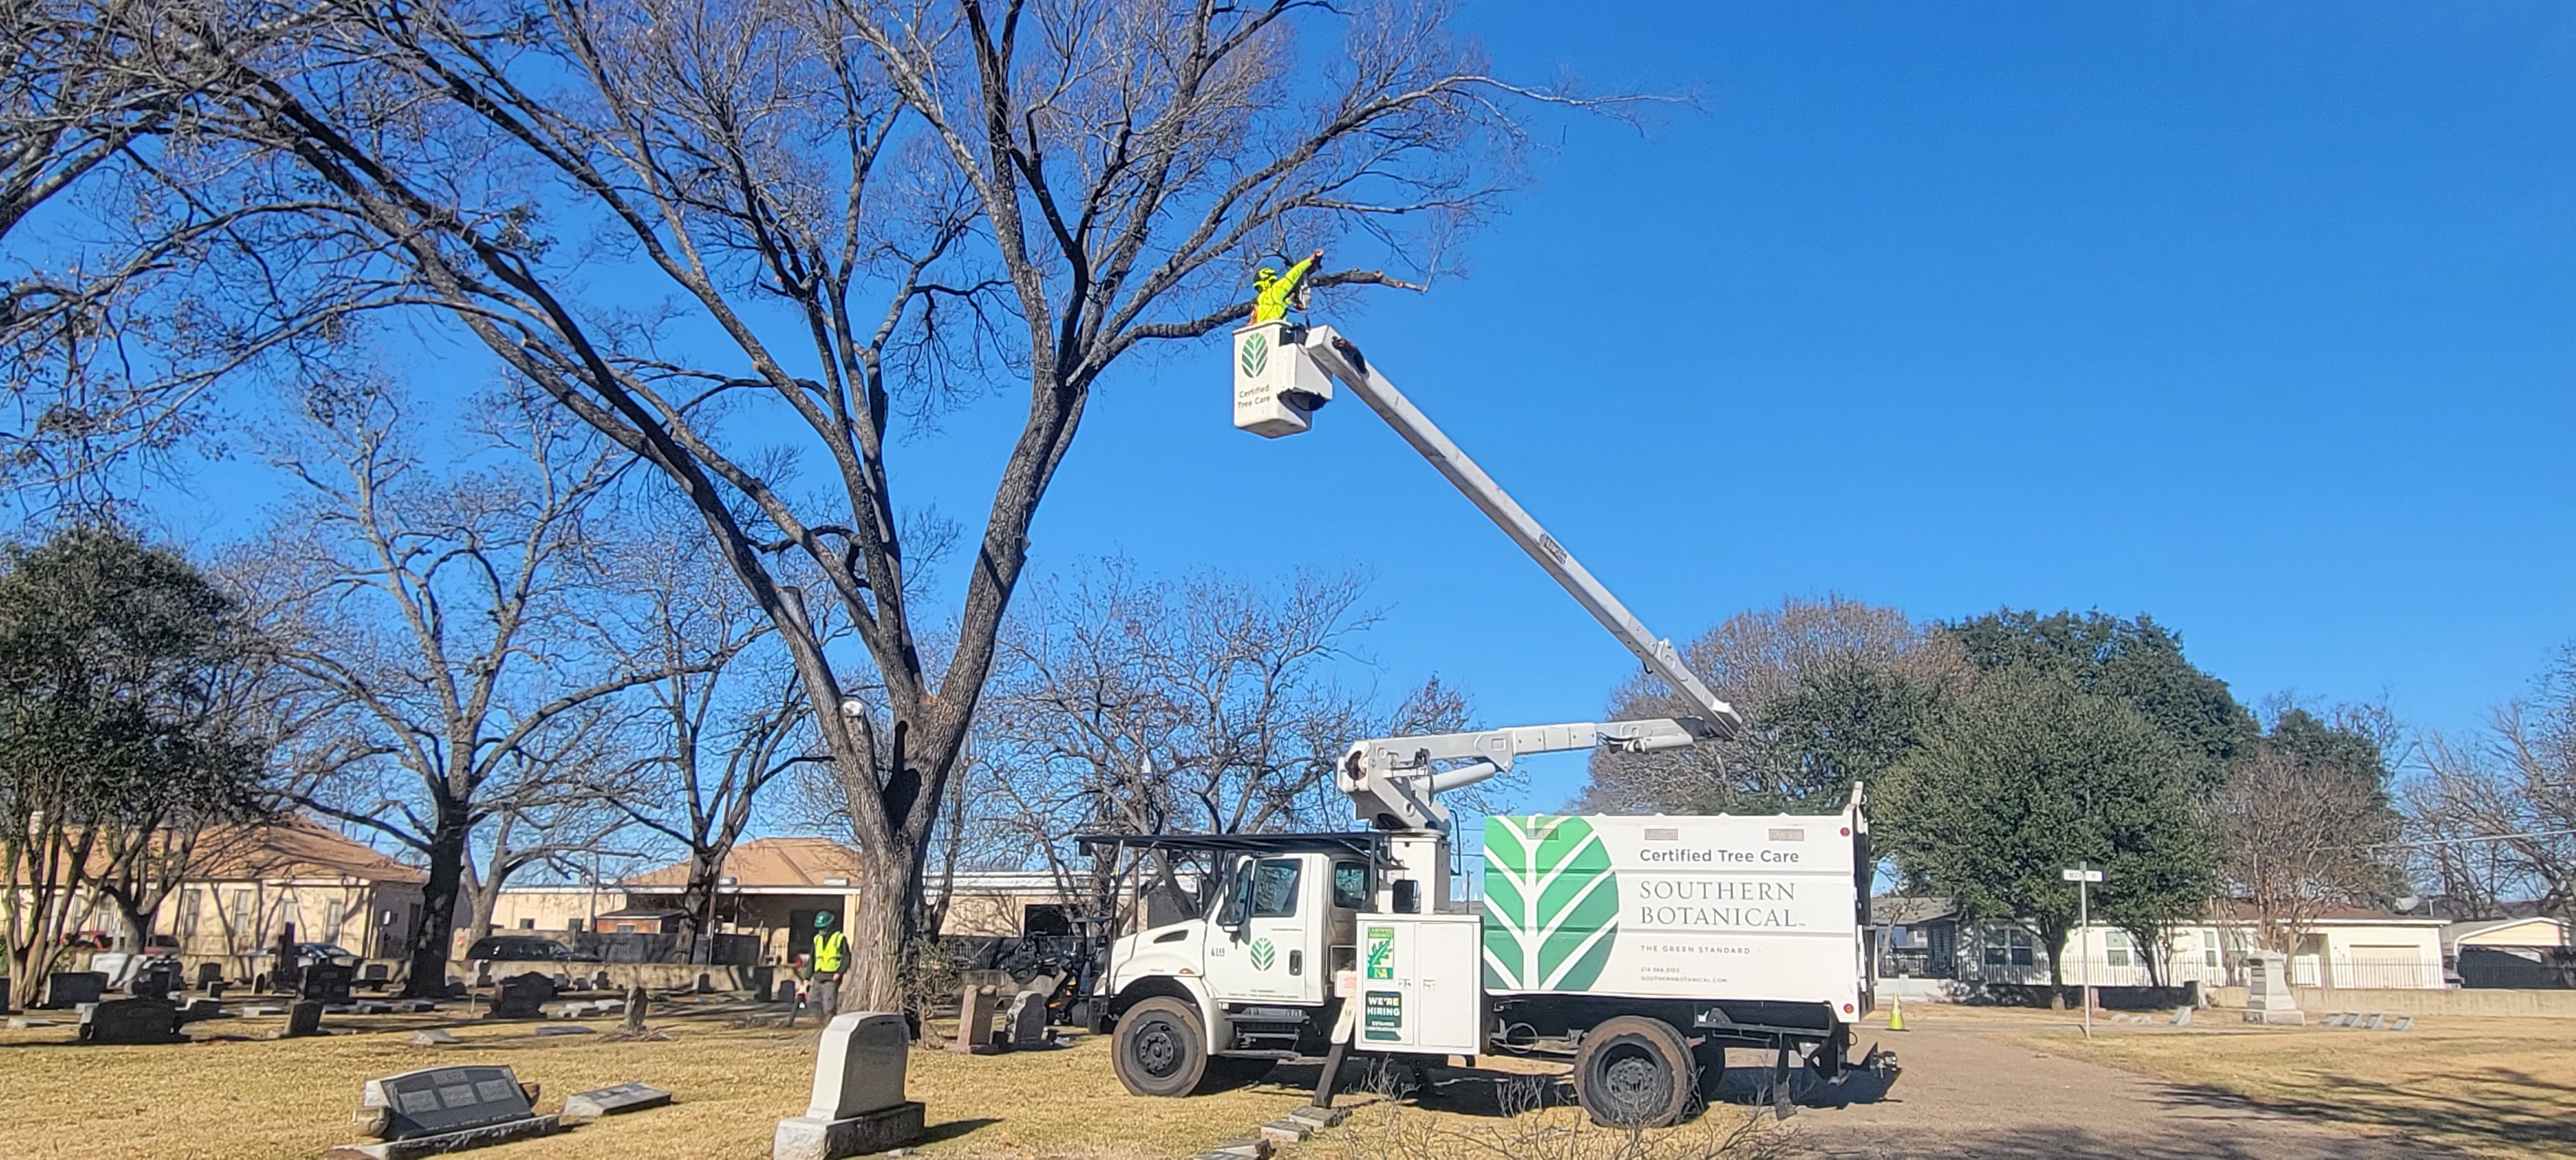 a man on a cherry picker working on a tree | Southern Botanical